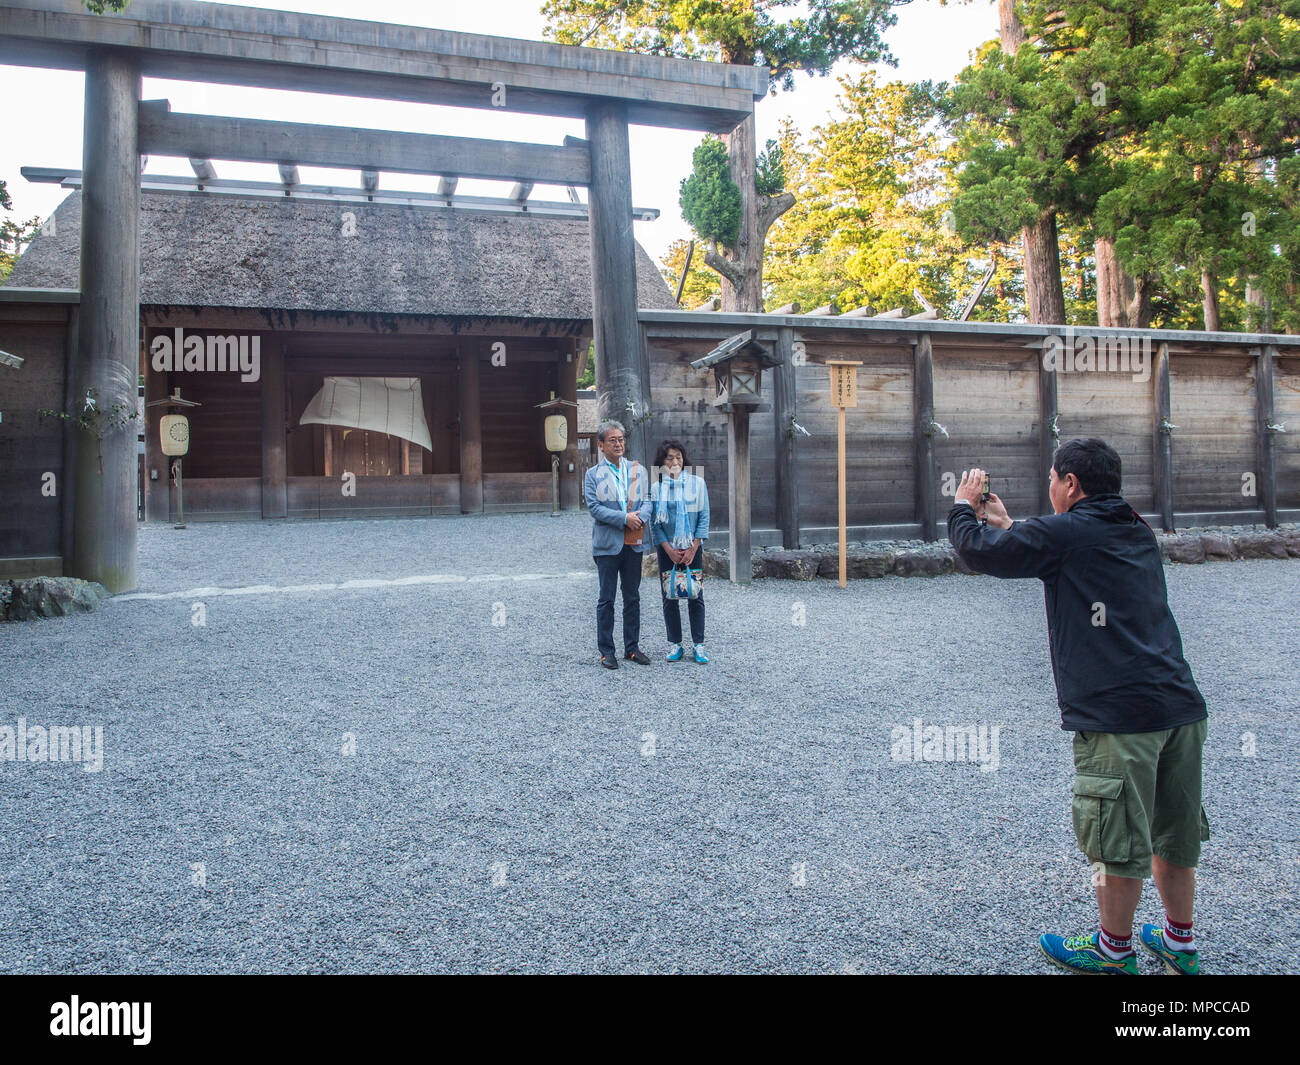 Man and woman being photographed in front of Goshoden main sanctuary entrance, Geku, Ise Jingu, Mie, Japan Stock Photo